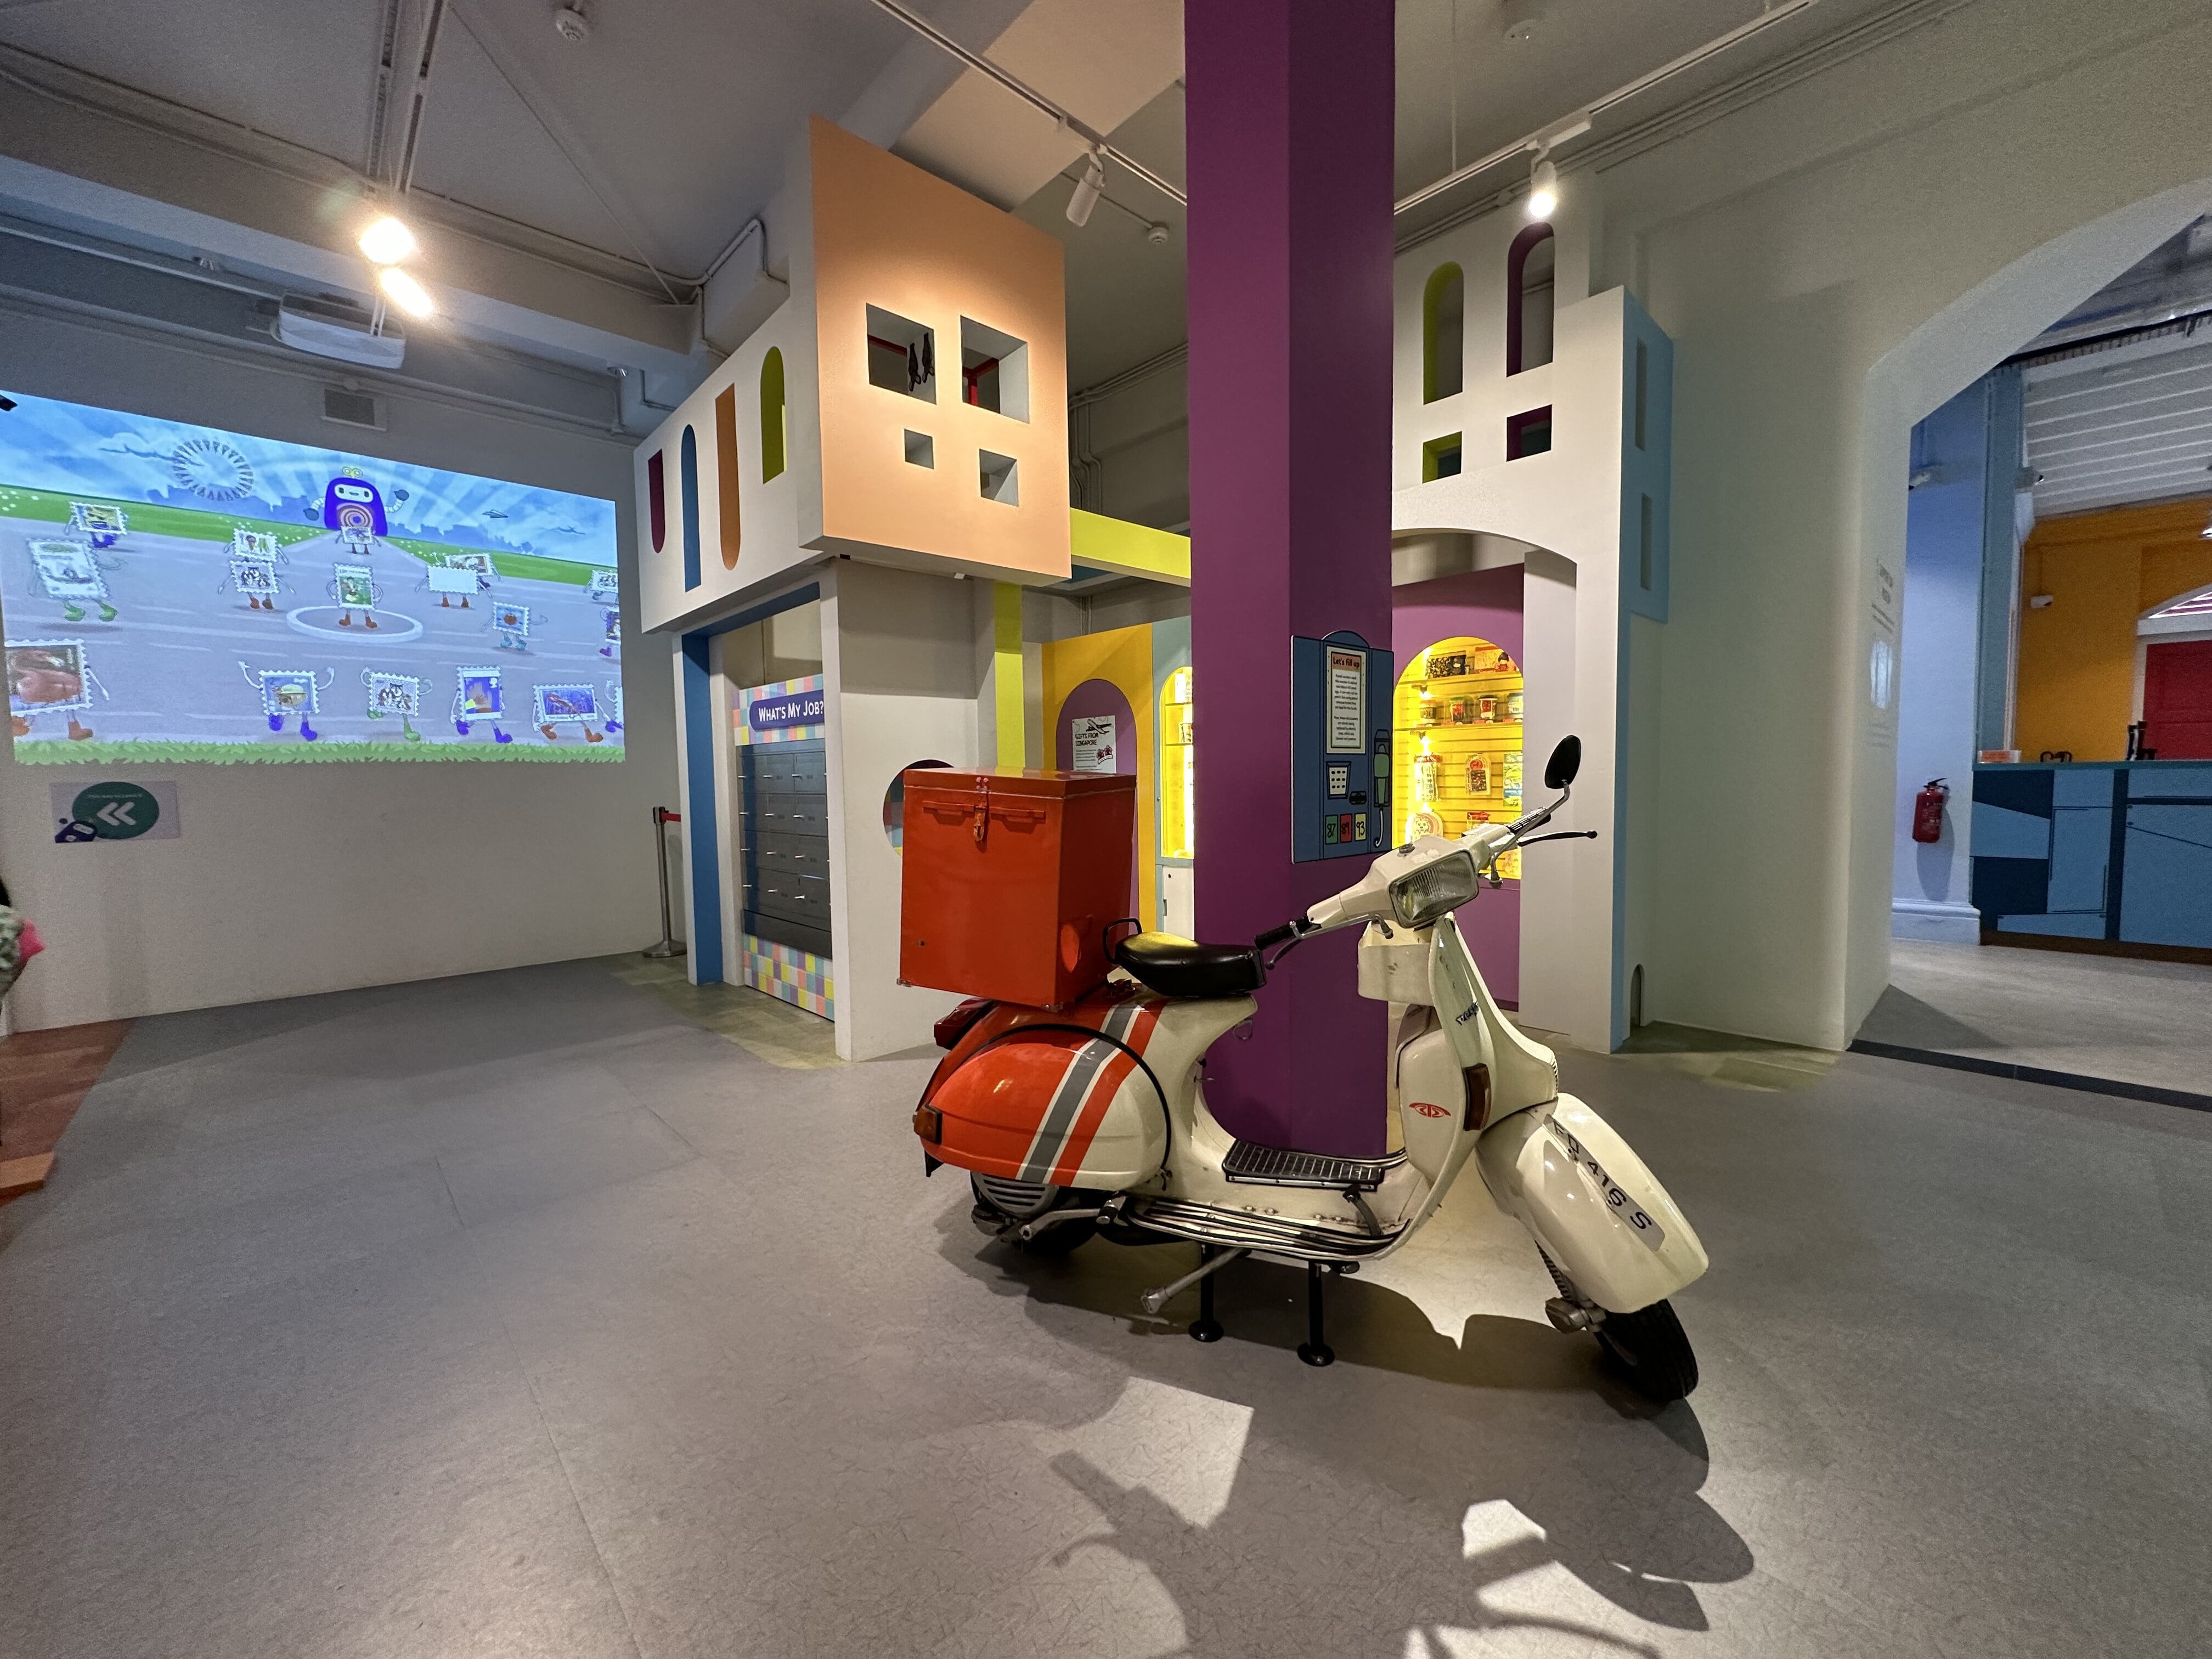   Wide shot of a scooter in the My Neighbourhood exhibition at the Children’s Museum Singapore